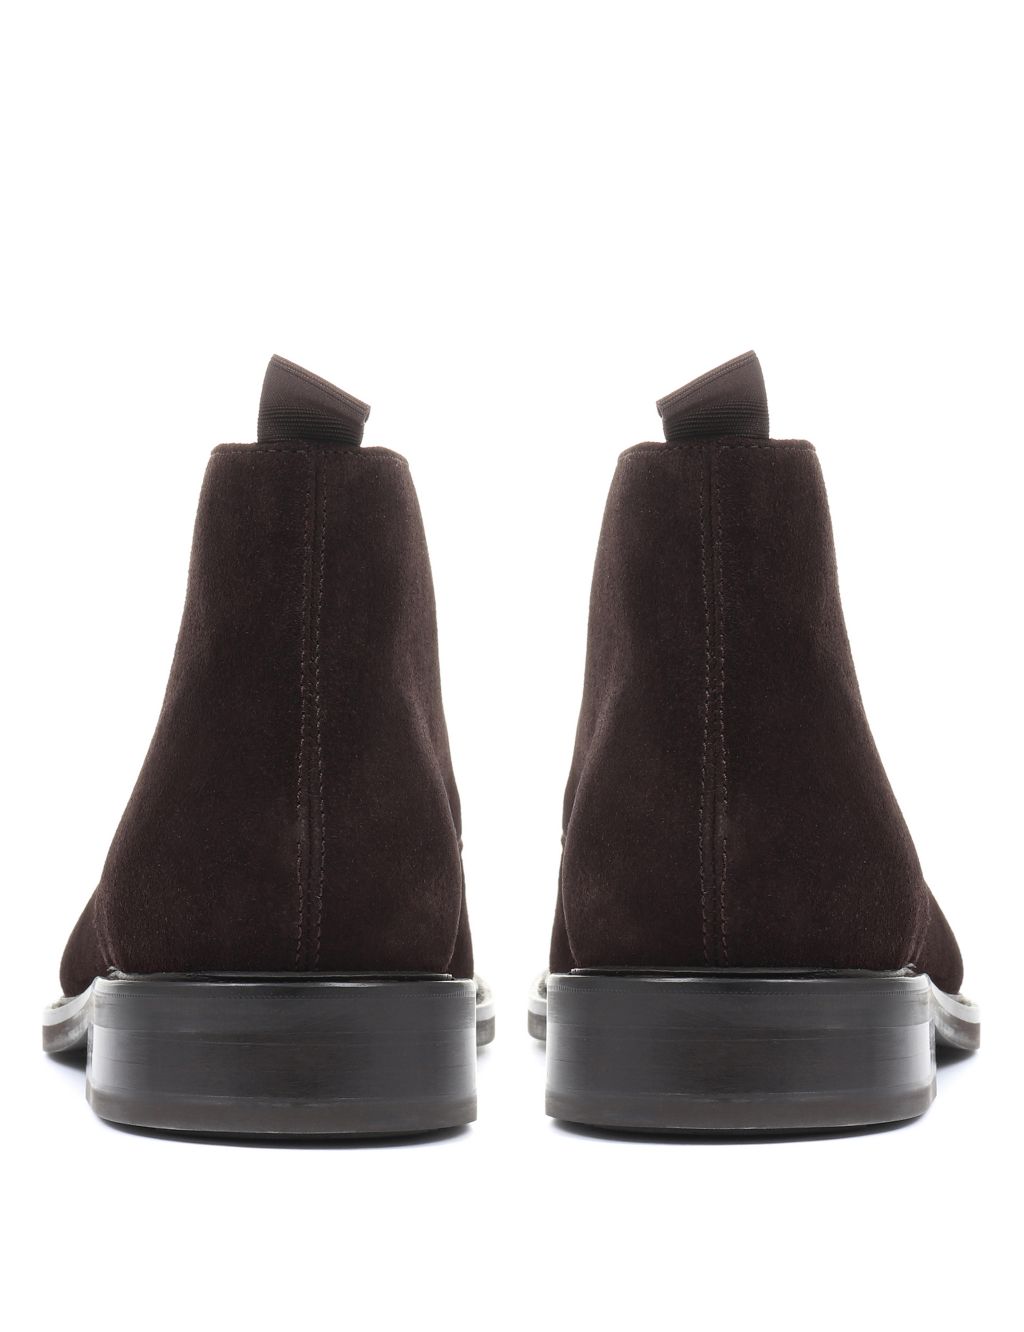 Suede Pull-on Chukka Boots image 3